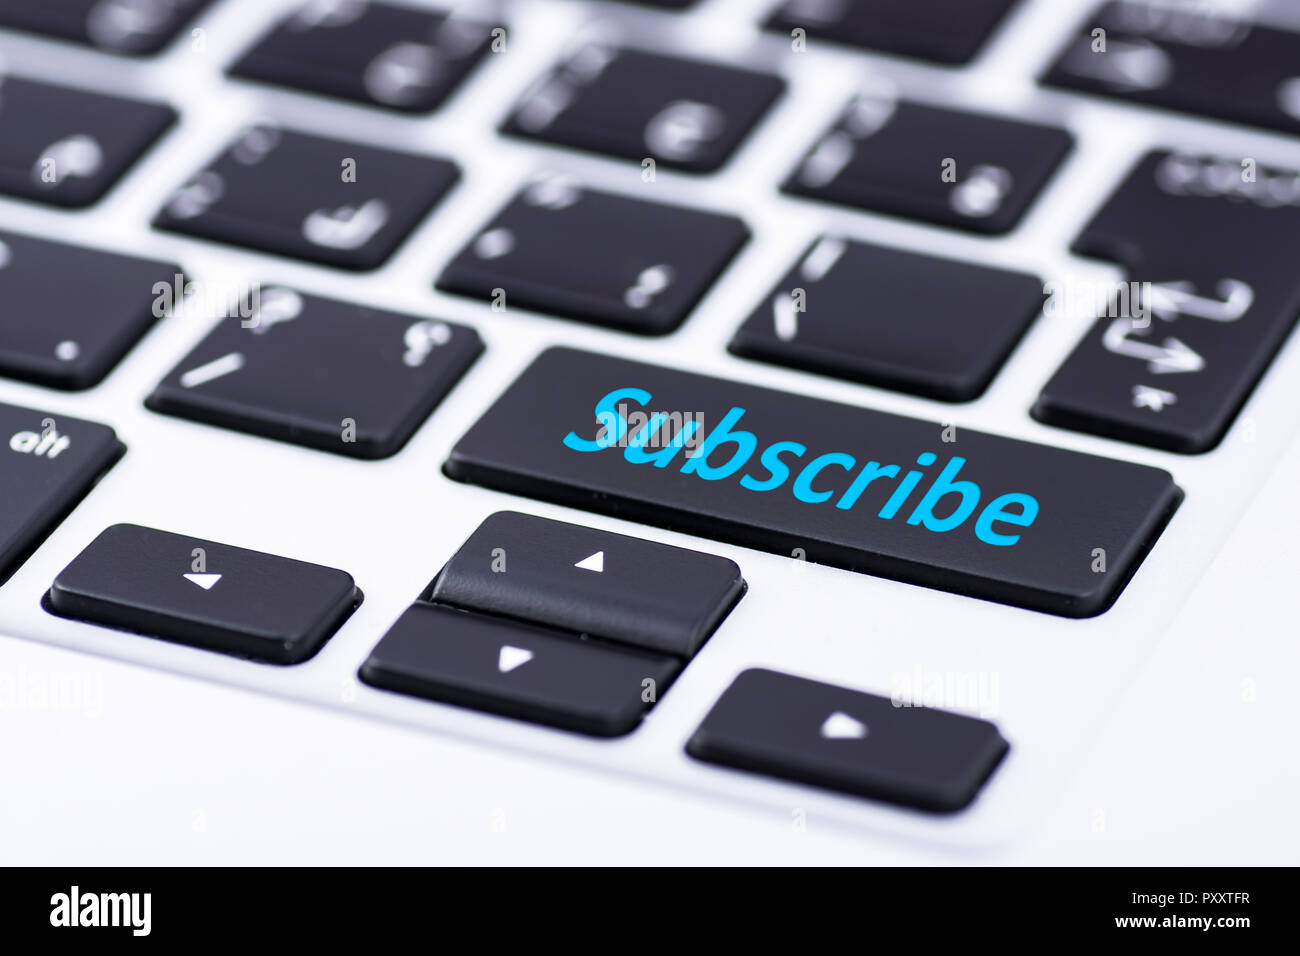 Subscribe on keyboard button Stock Photo